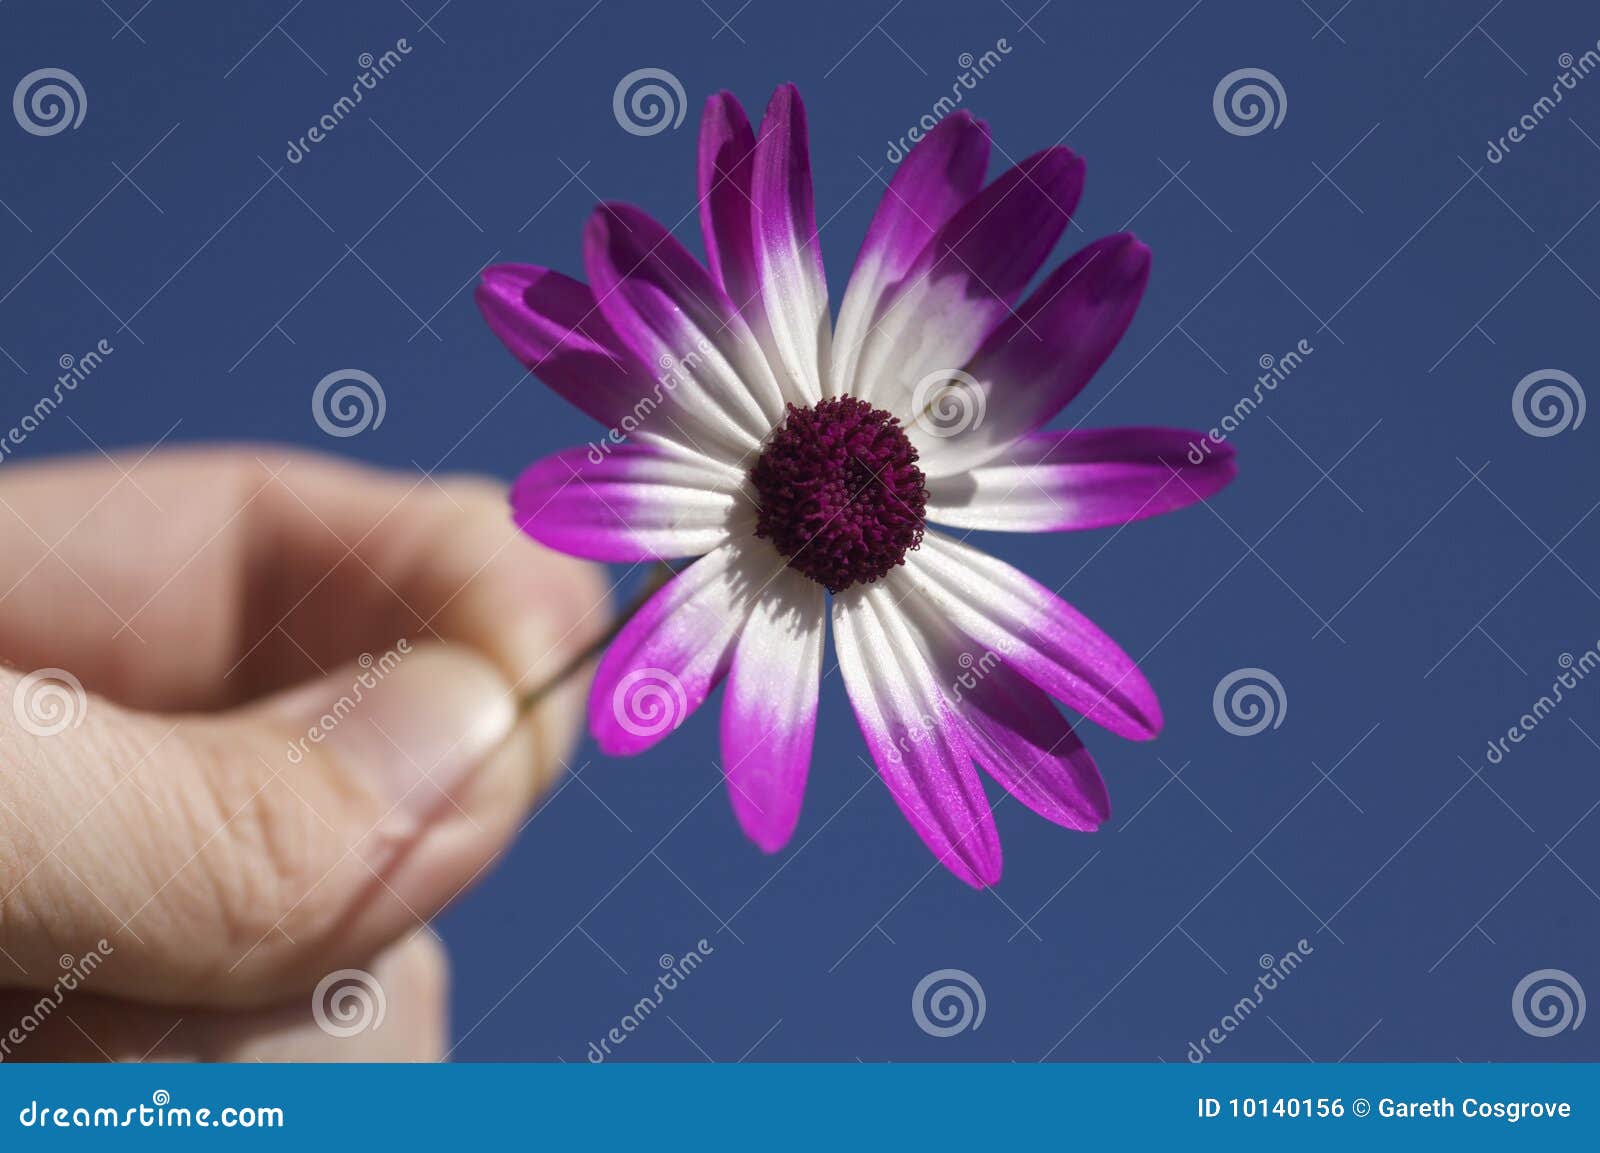 person holding flower 10140156